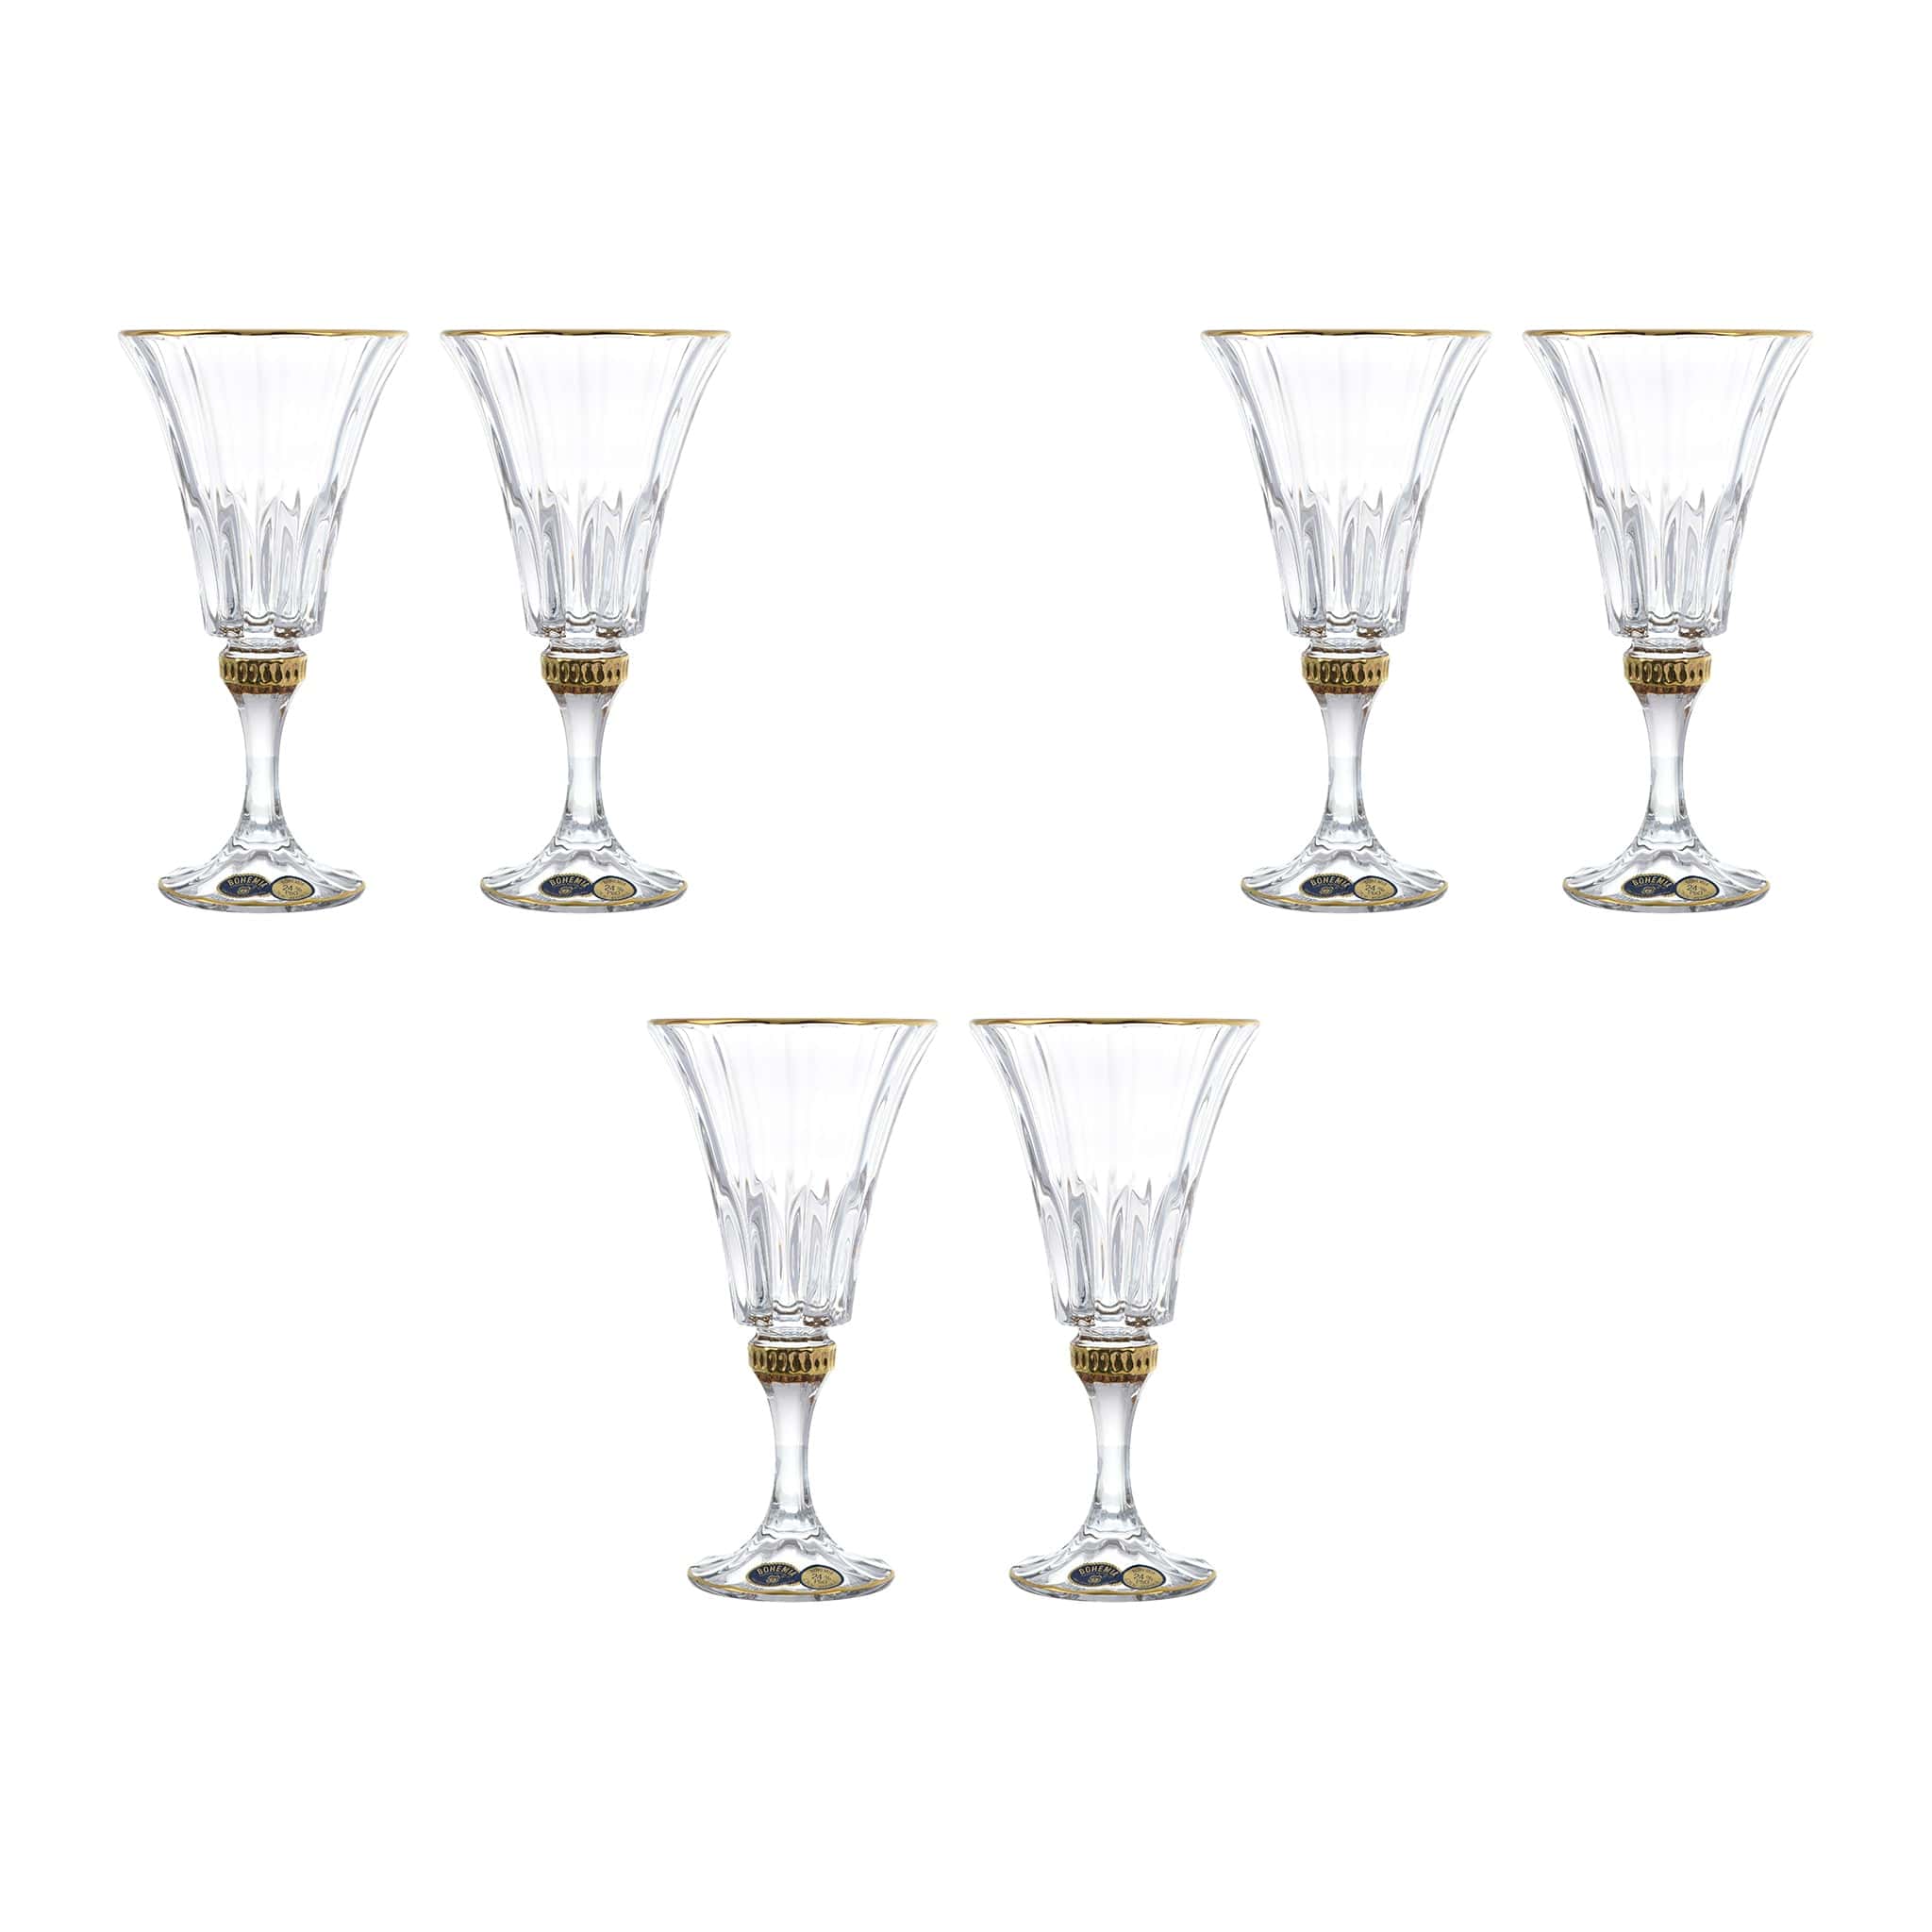 Bohemia Crystal - Goblet Glass Set 6 Pieces With Gold Rim - 240ml - 270006821